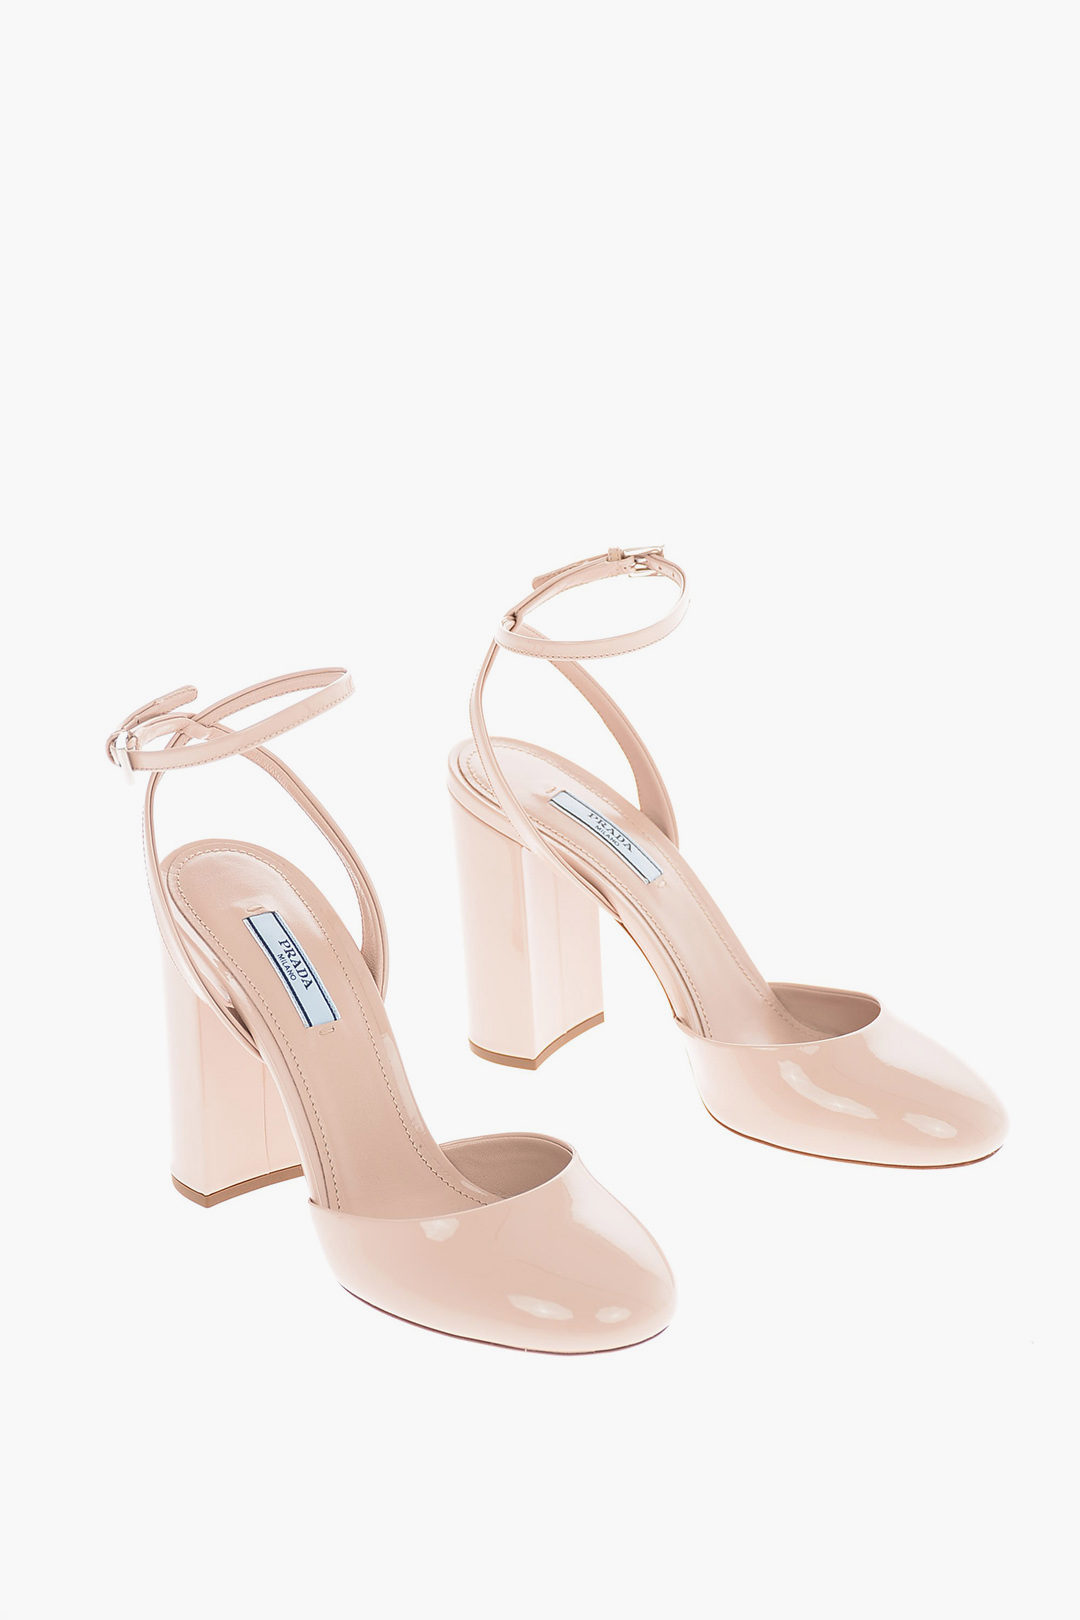 Prada Pumps with Ankle Strap 11 Cm women - Glamood Outlet